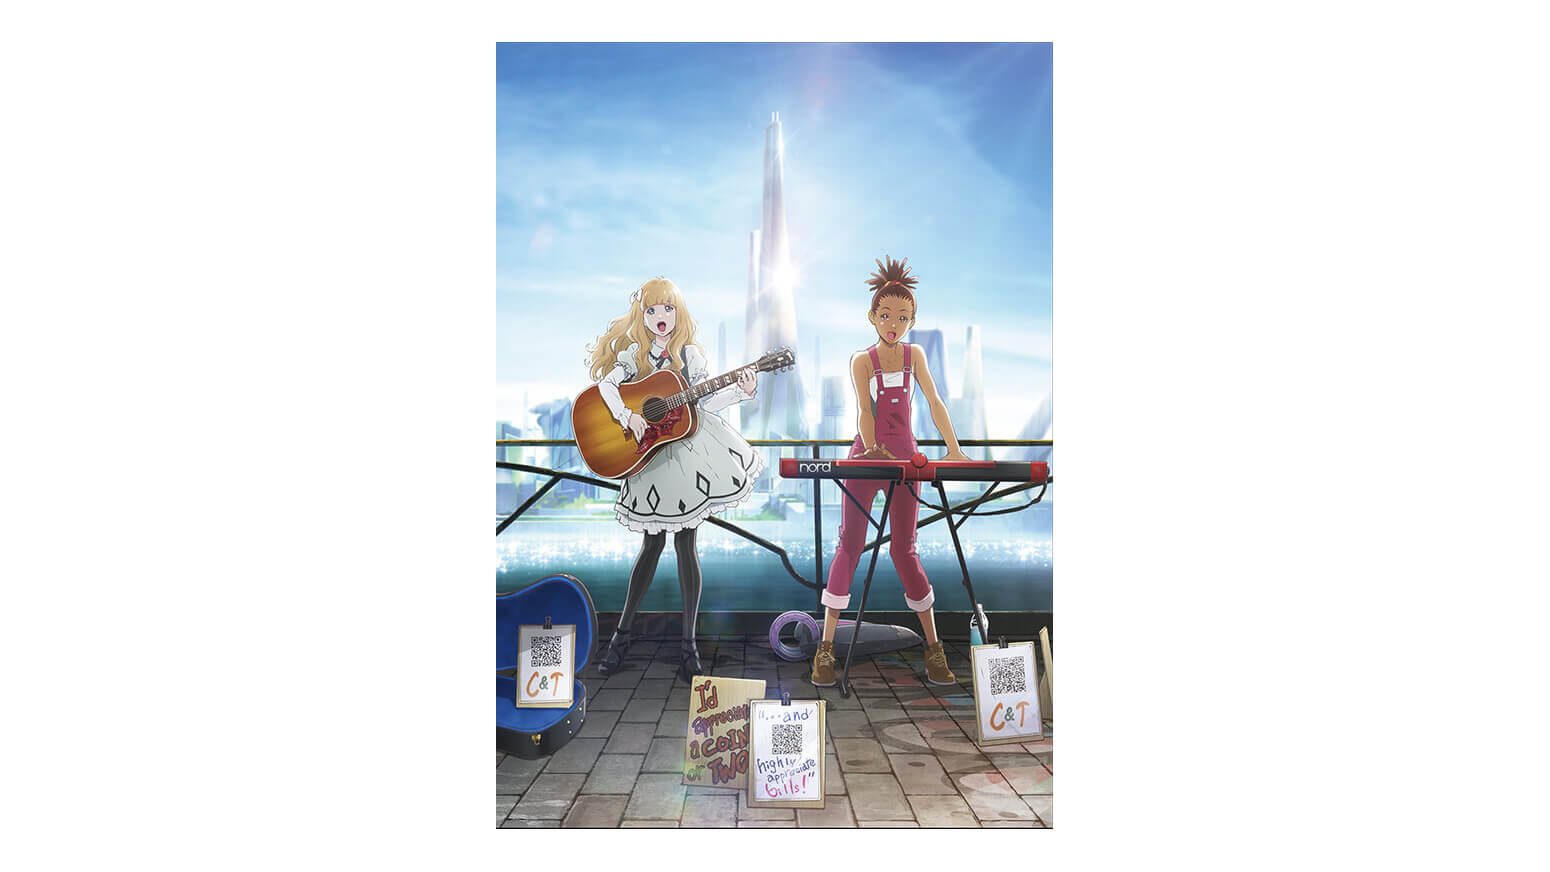 Carole  Tuesday  Trailer  Carole  Tuesday  Trailer  The anime is  scheduled to premiere April 10 2019 on Netflix   By Carole  Tuesday   Facebook